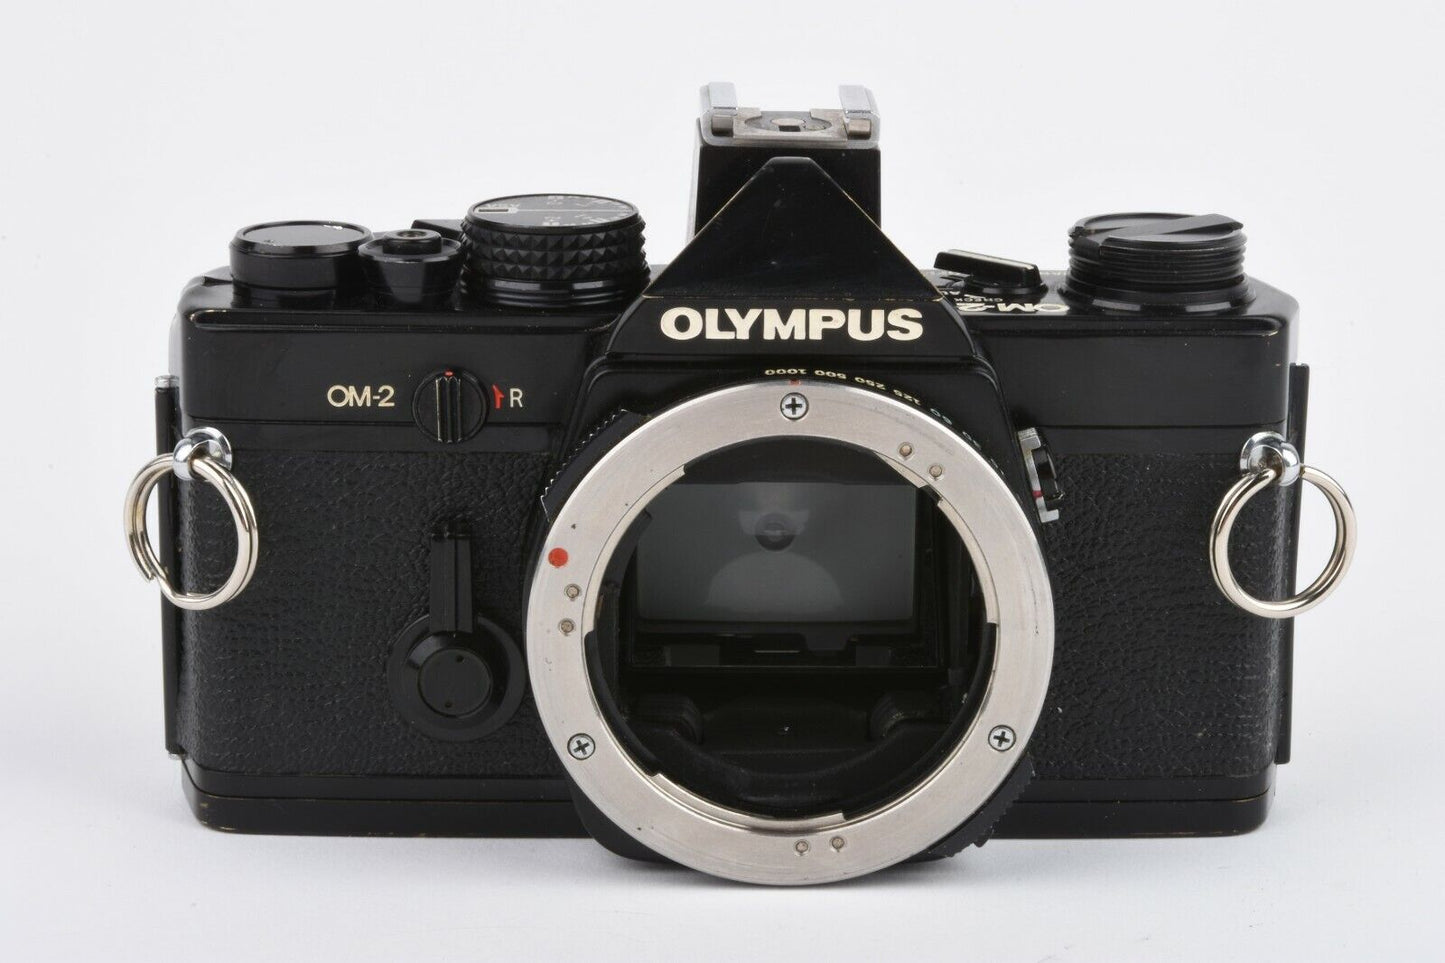 EXC++ OLYMPUS OM-2 BLACK 35mm SLR BODY CLA'D NEW SEALS, NICE, CLEAN, ACCURATE